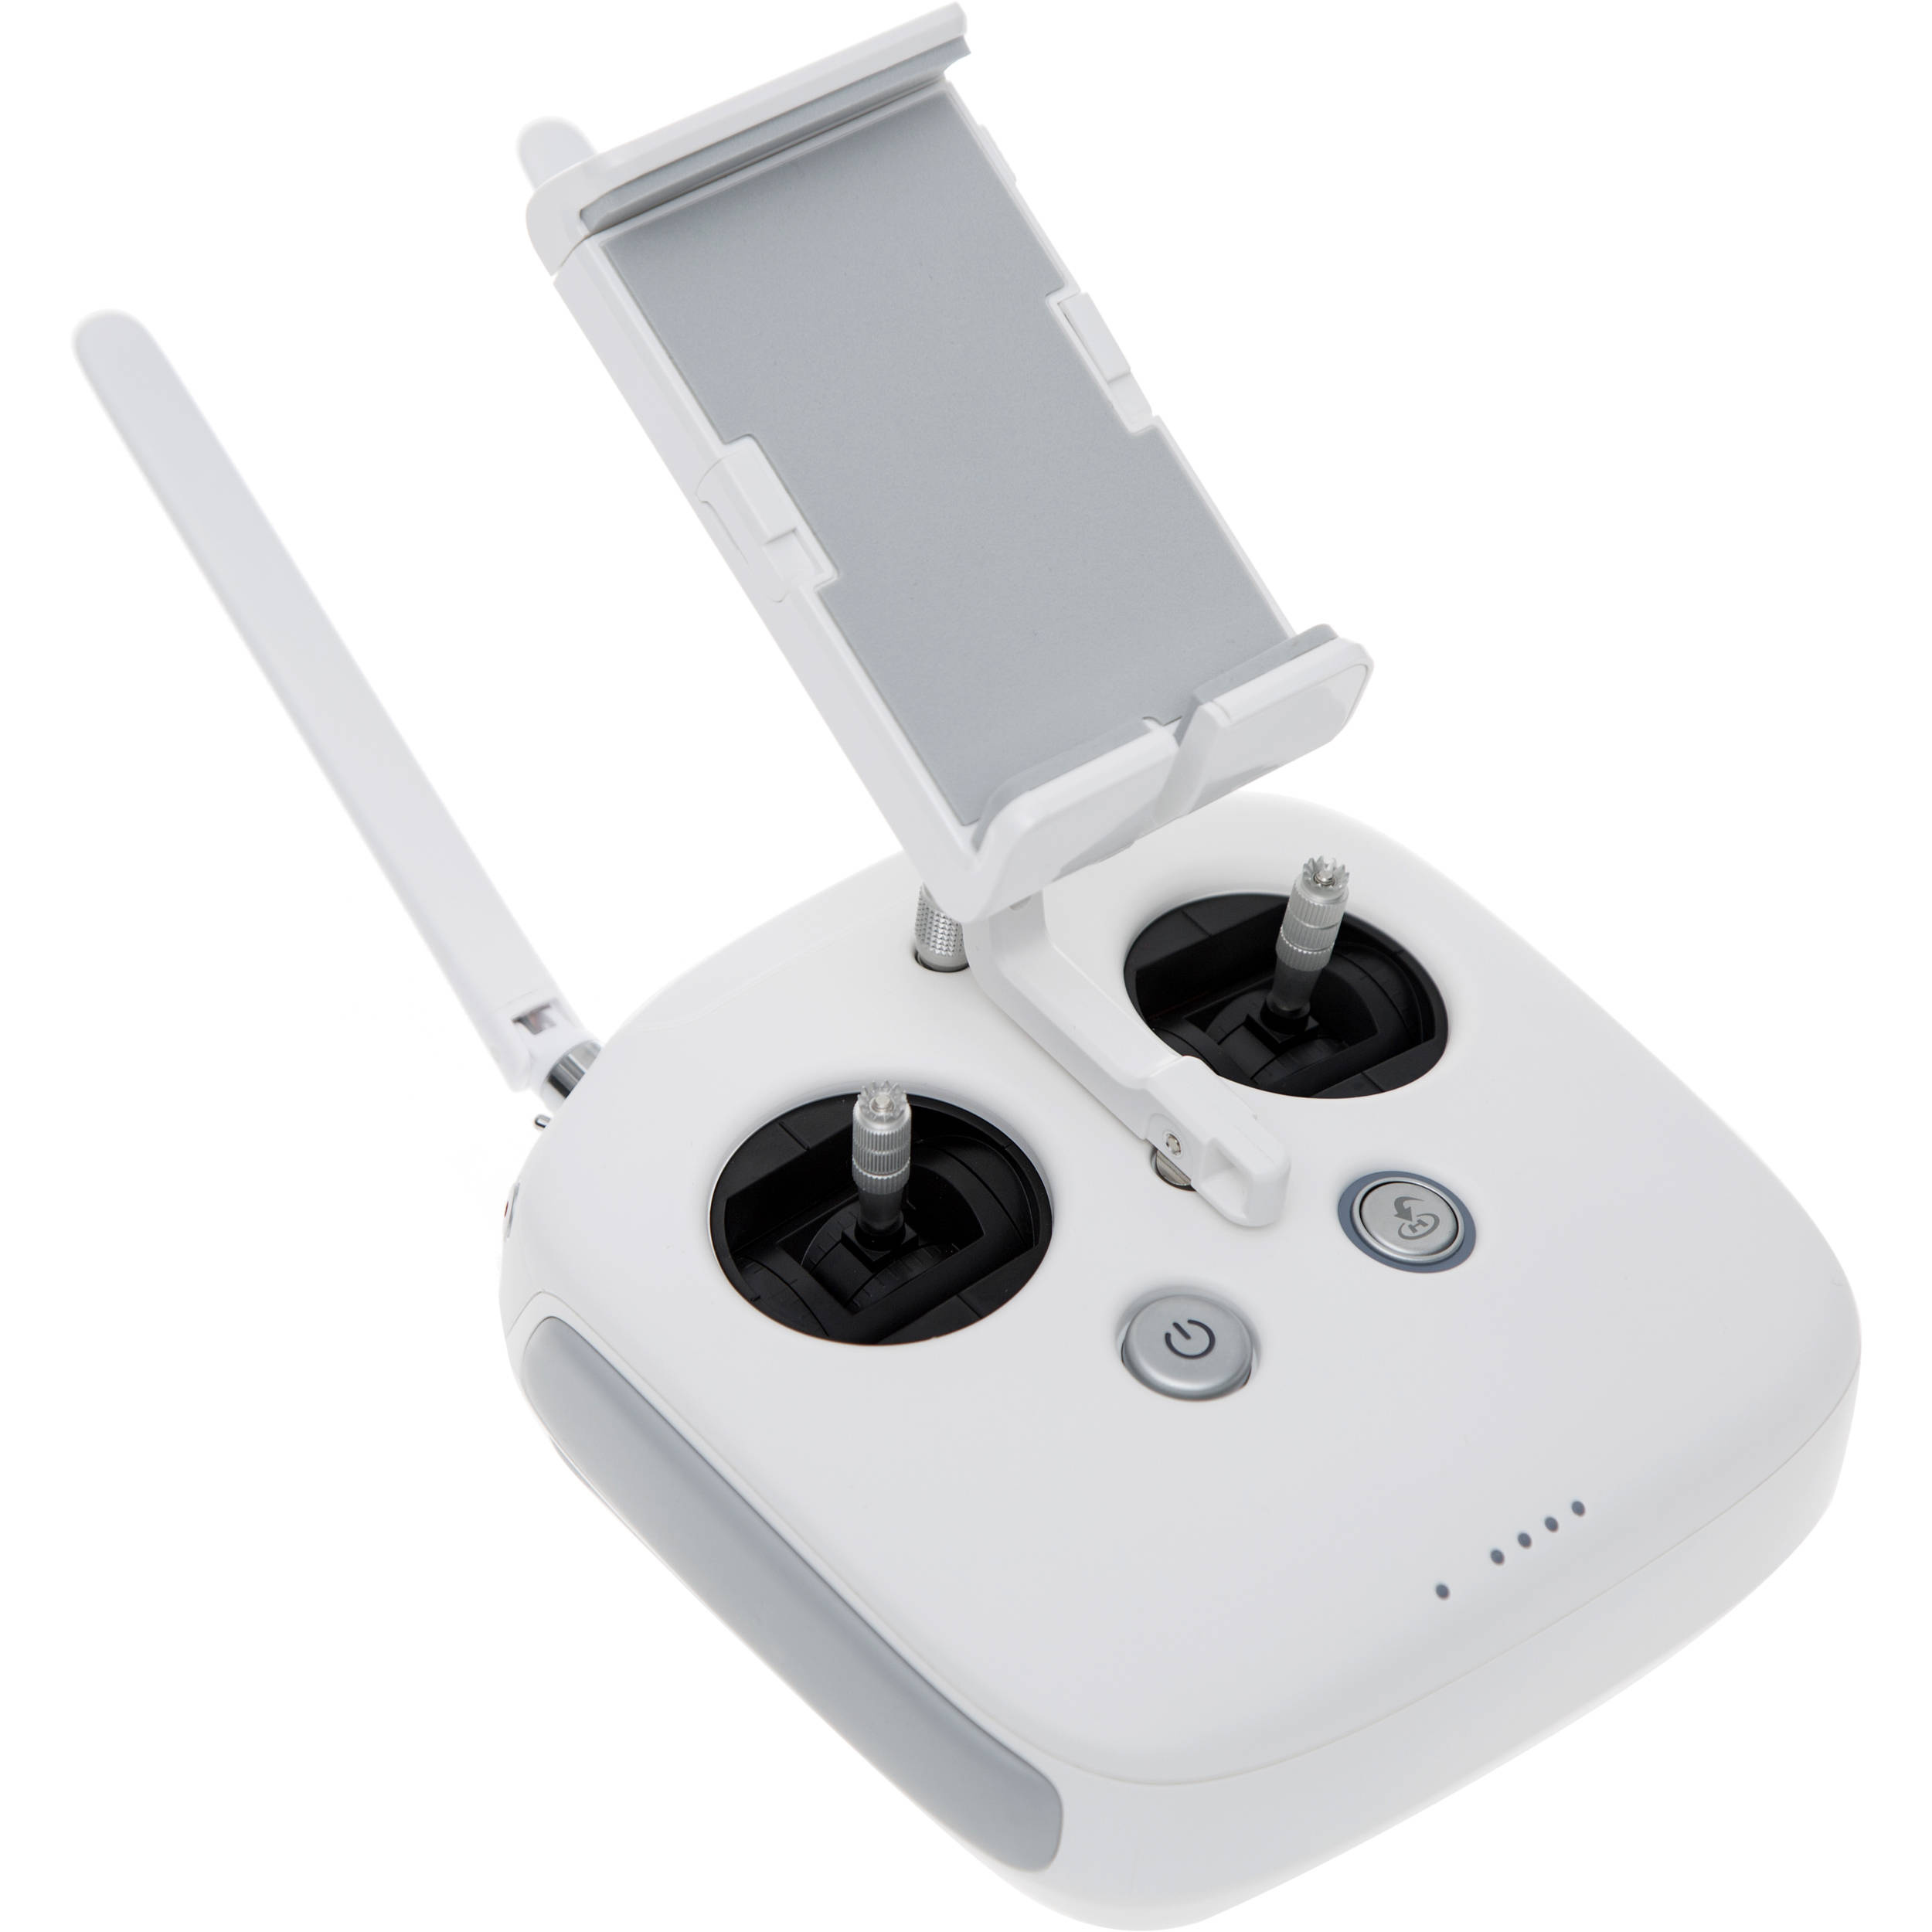 DJI Remote Controller for Phantom 3 Advanced and Professional